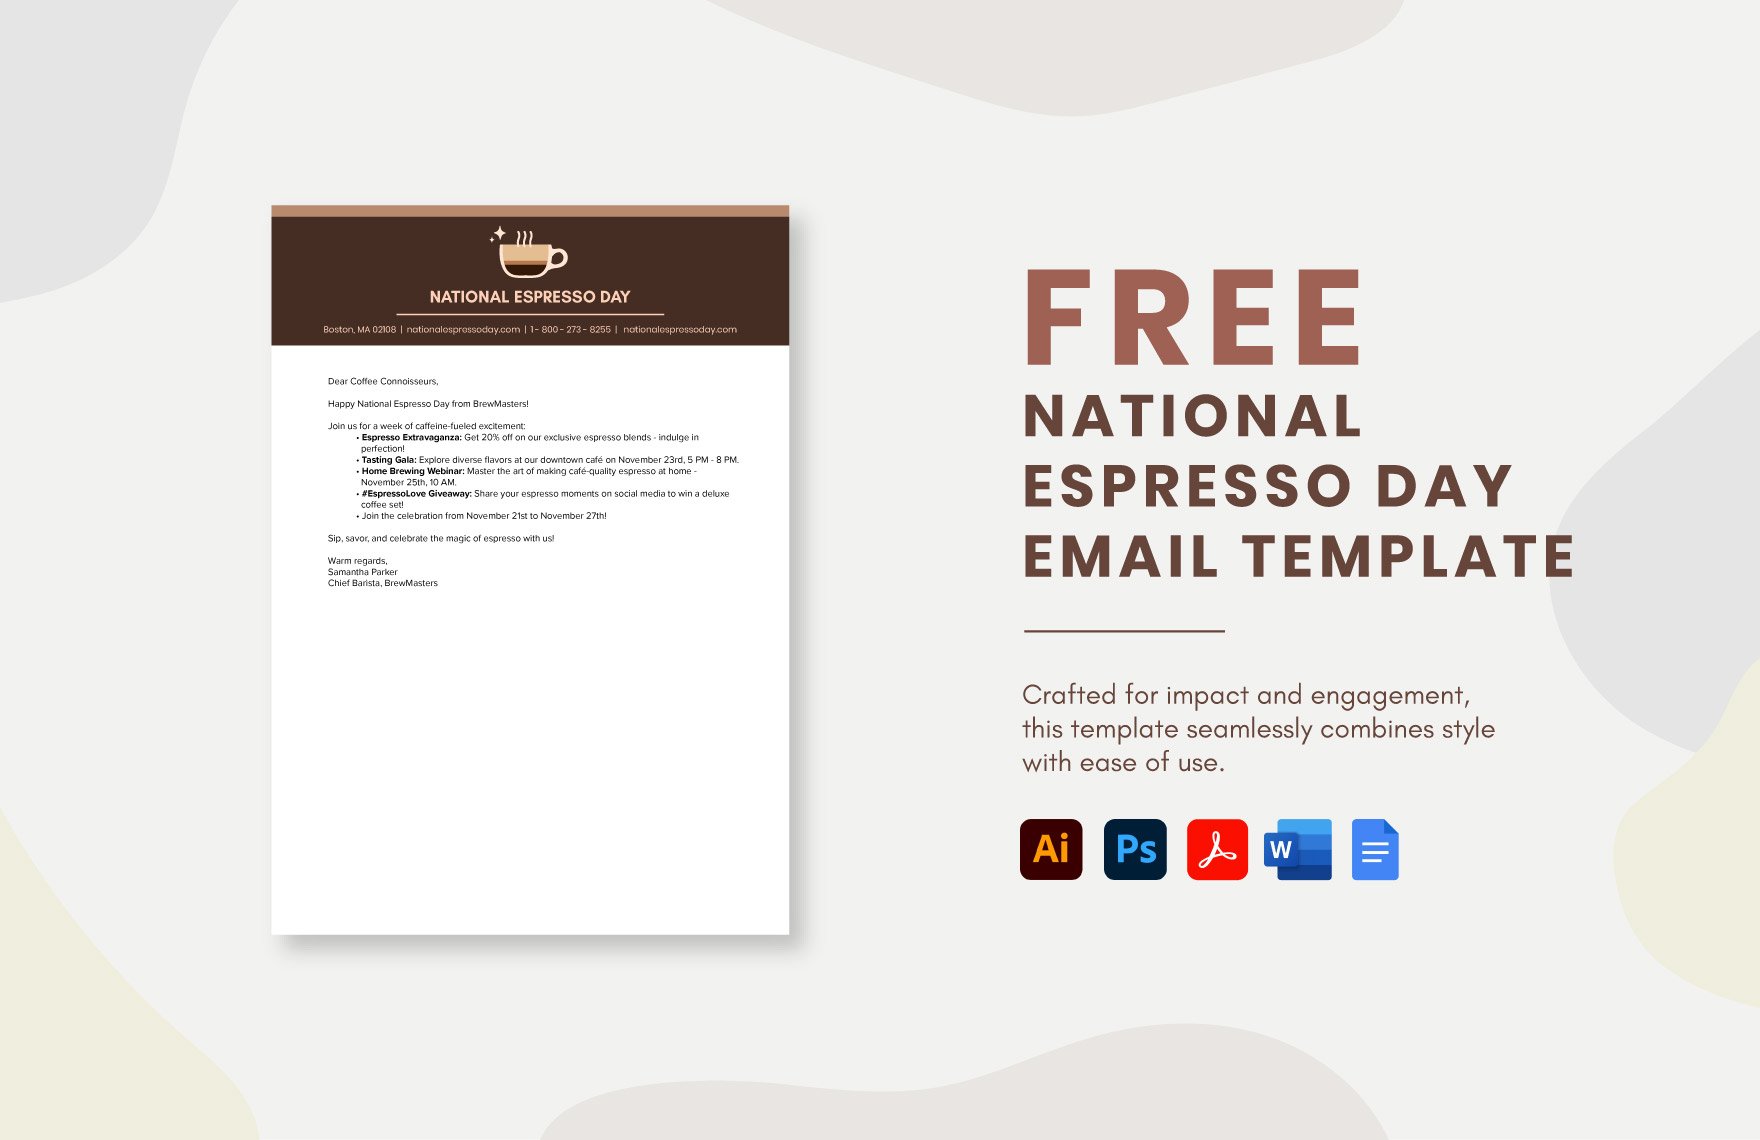 National Espresso Day Email Template